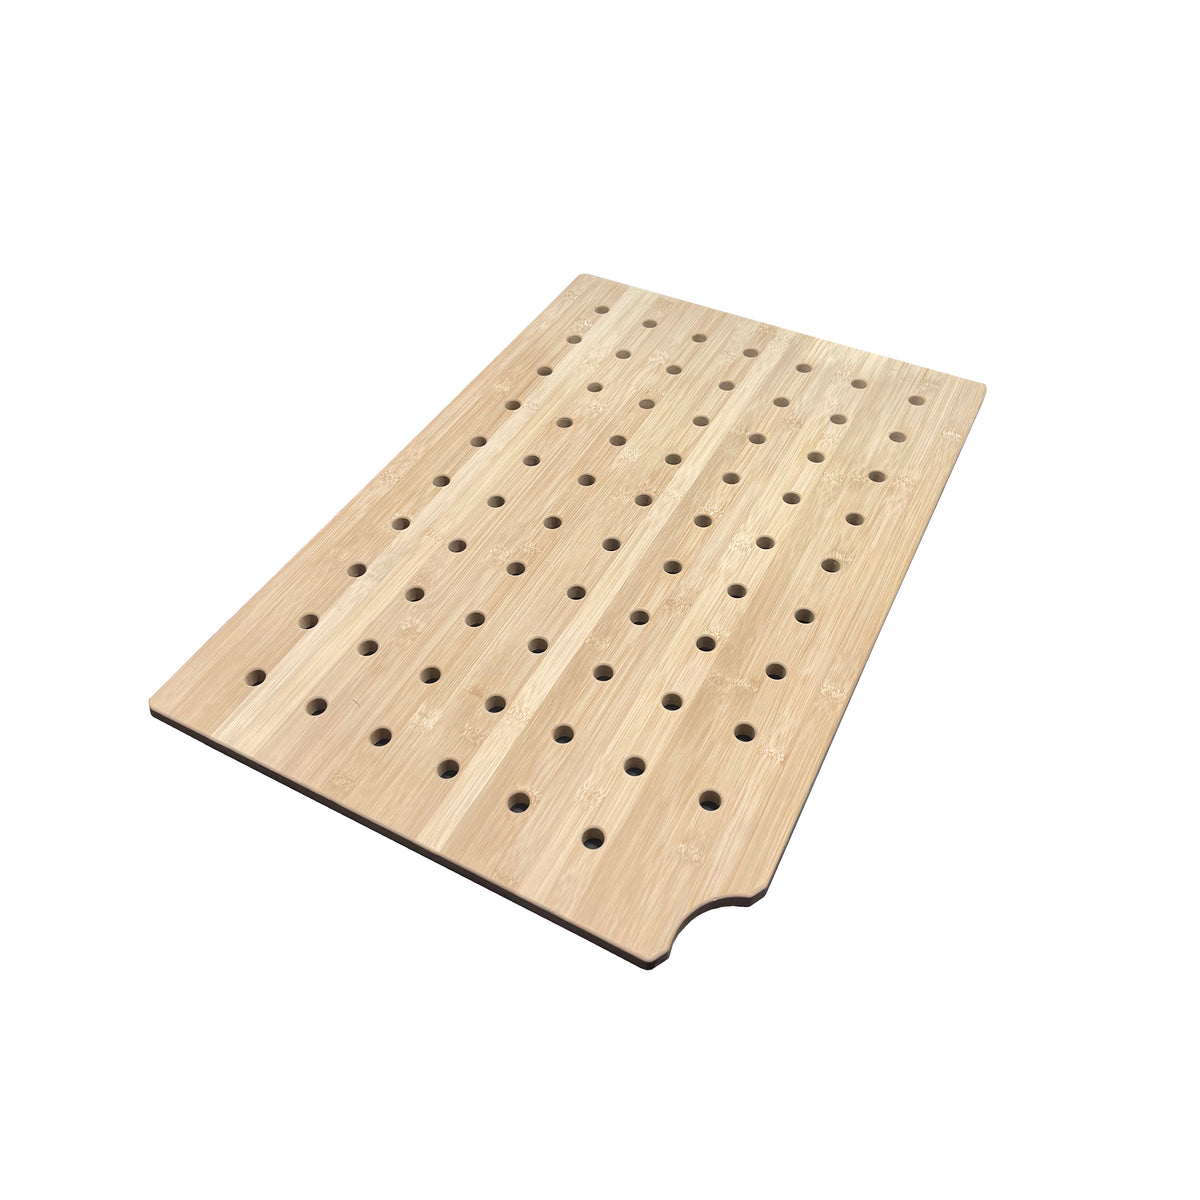 Bamboo Shower Mat - Fits 144 Removable Shower Pan